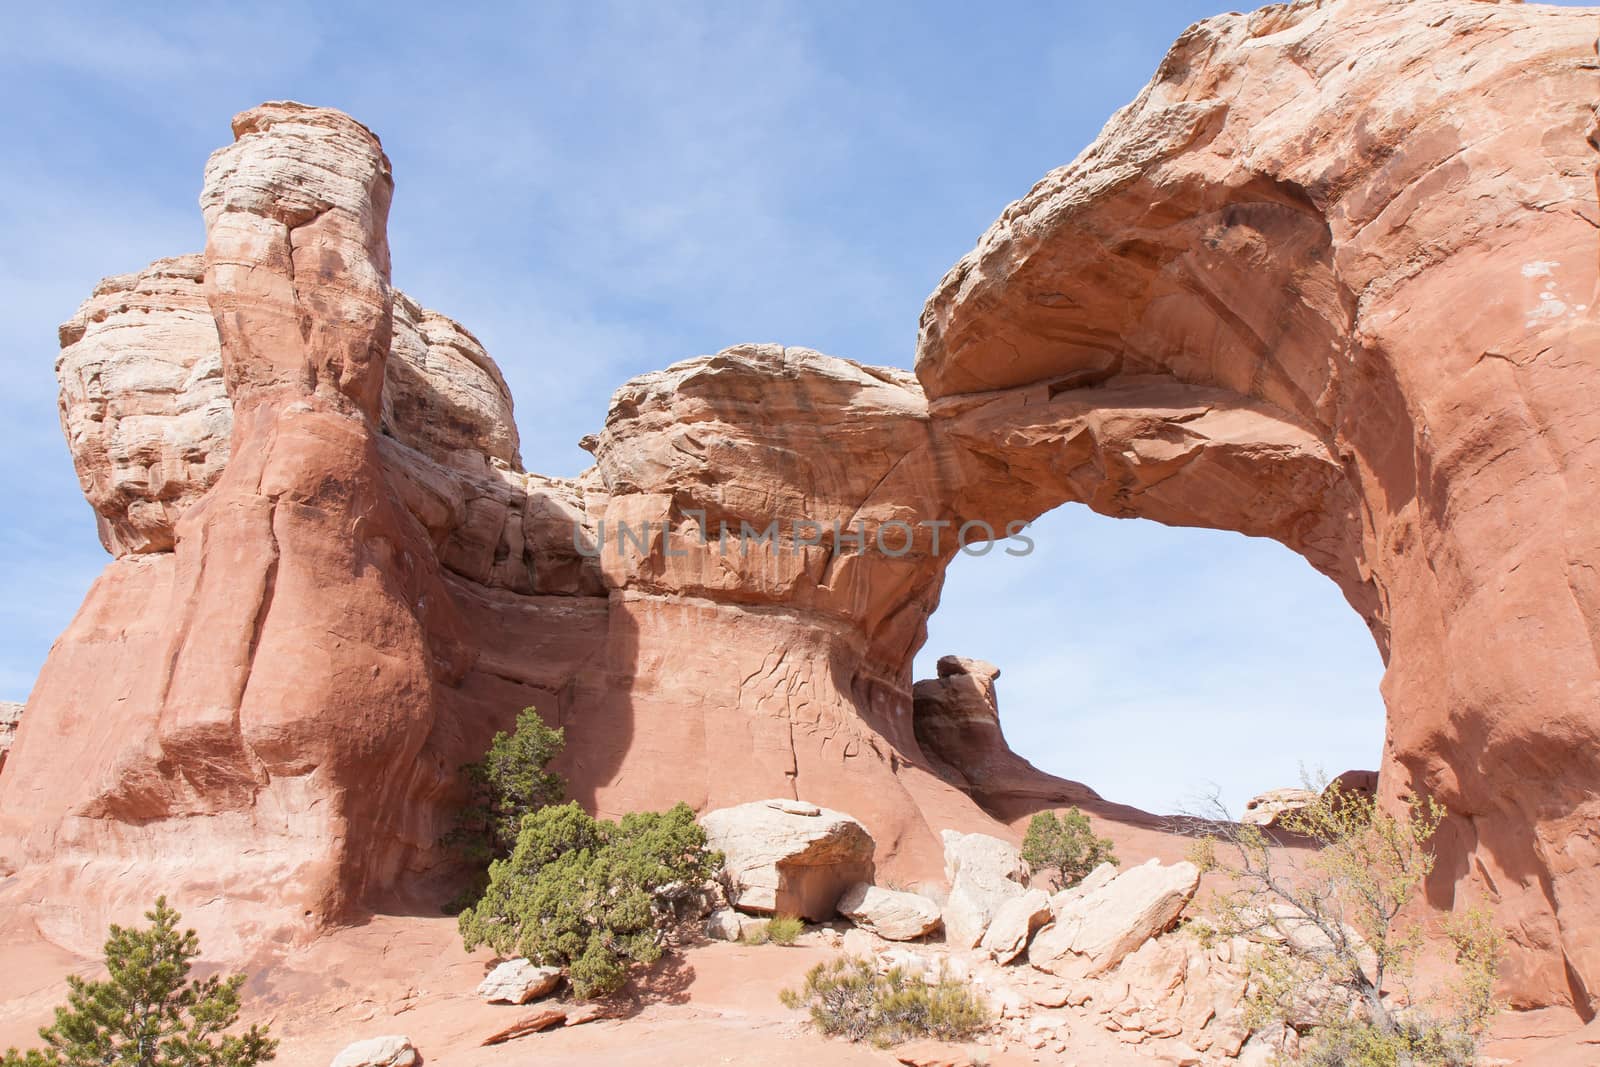 At Arches National Park this opening appears to be watched by guards on the left.